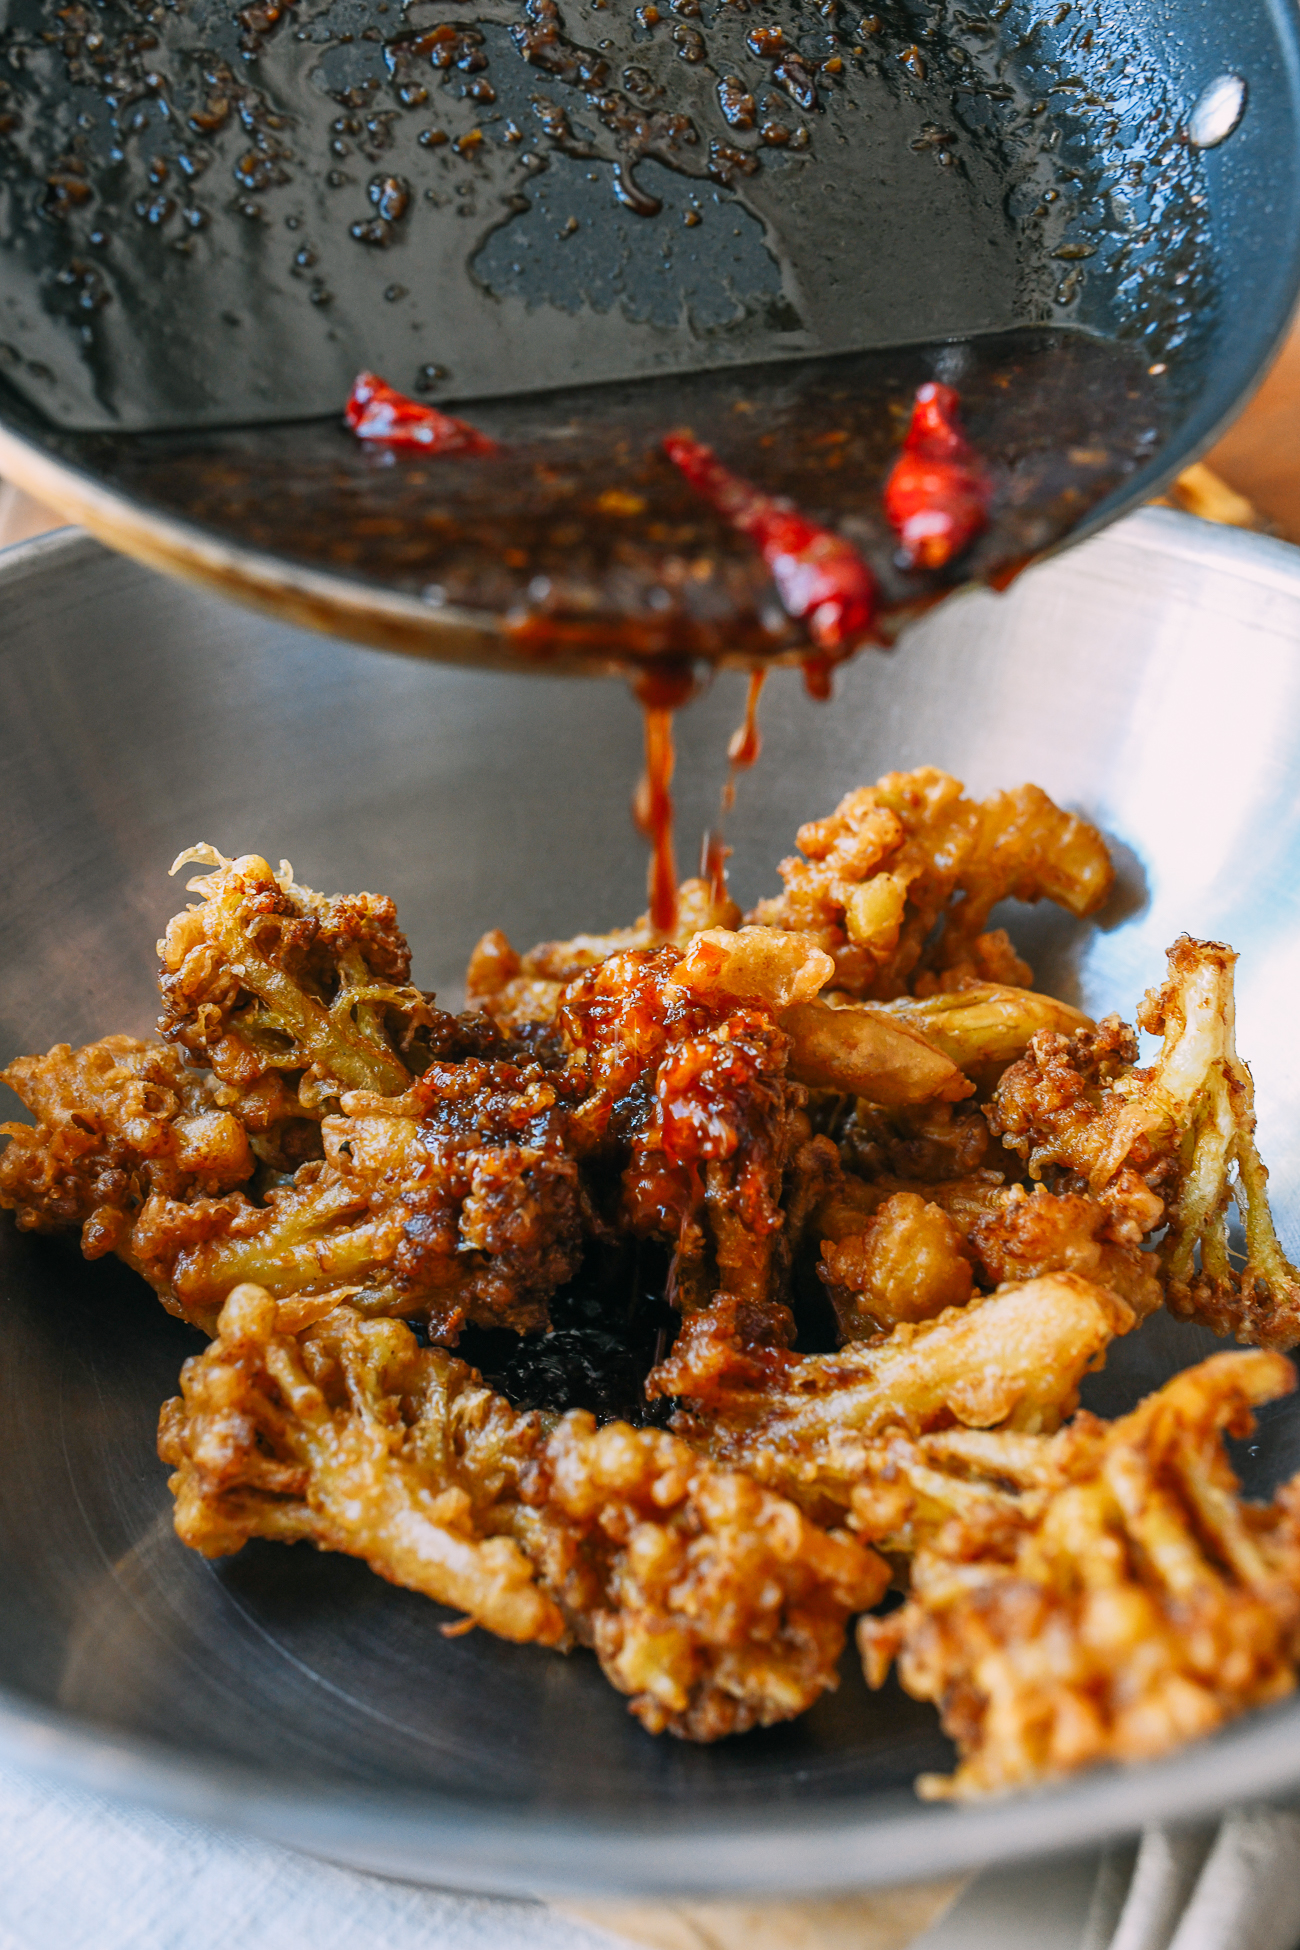 Pouring sauce over fried cauliflower